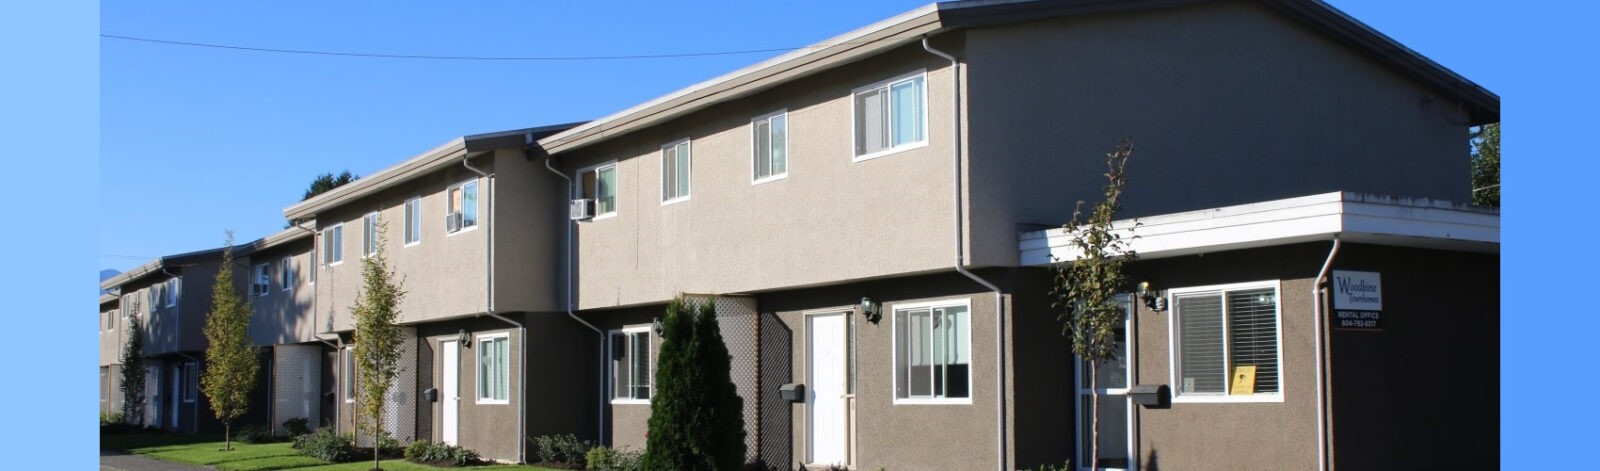 New Apartments Houses For Rent In Chilliwack for Large Space